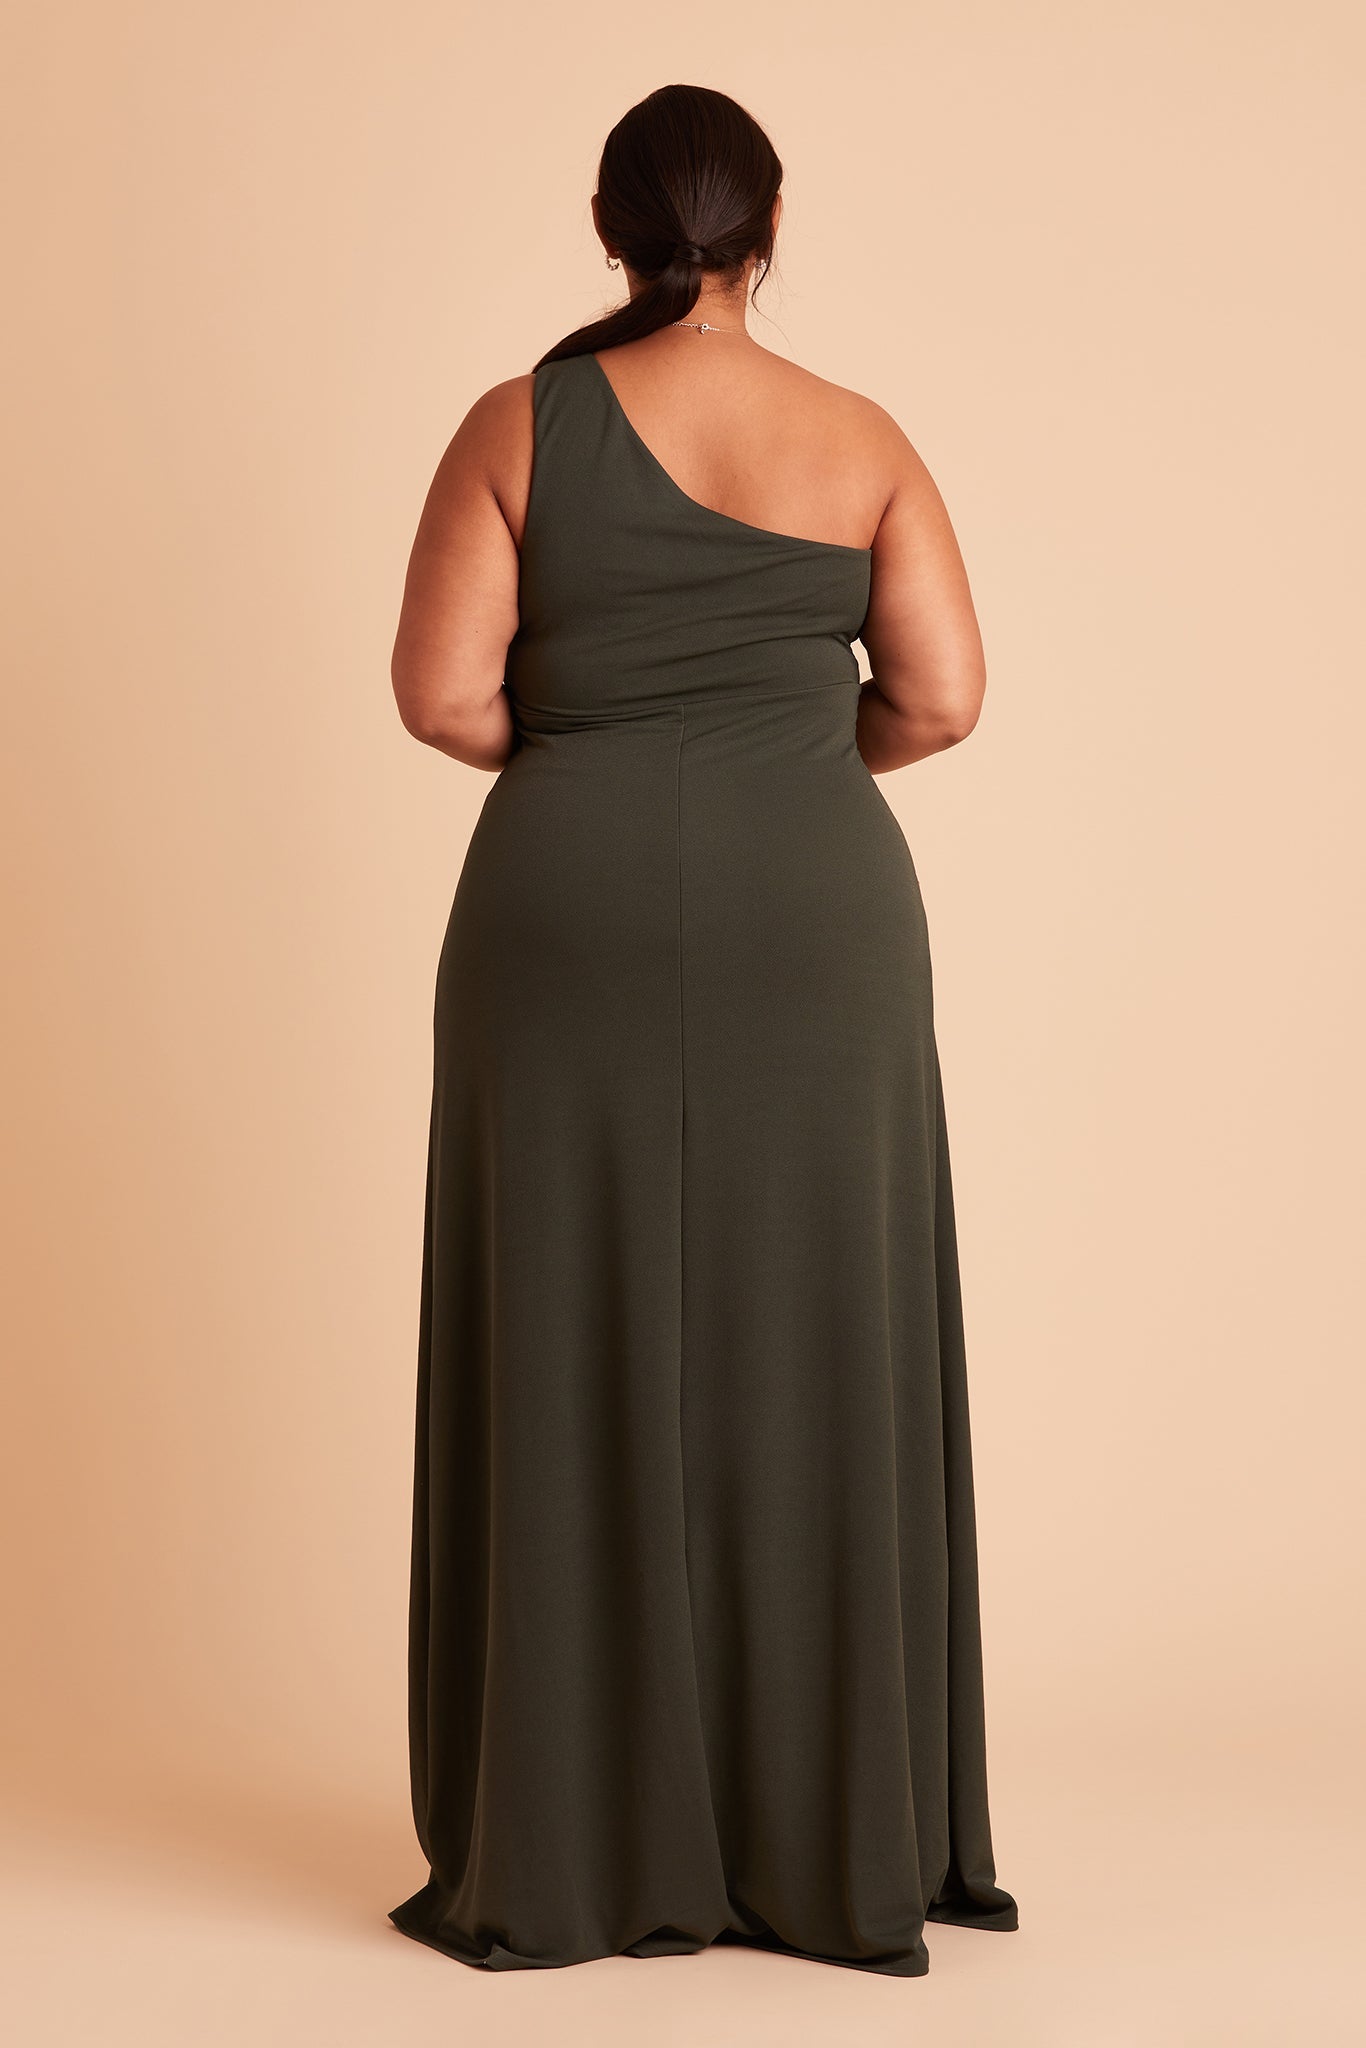 Kira plus size bridesmaid dress with slit in olive crepe by Birdy Grey, back view